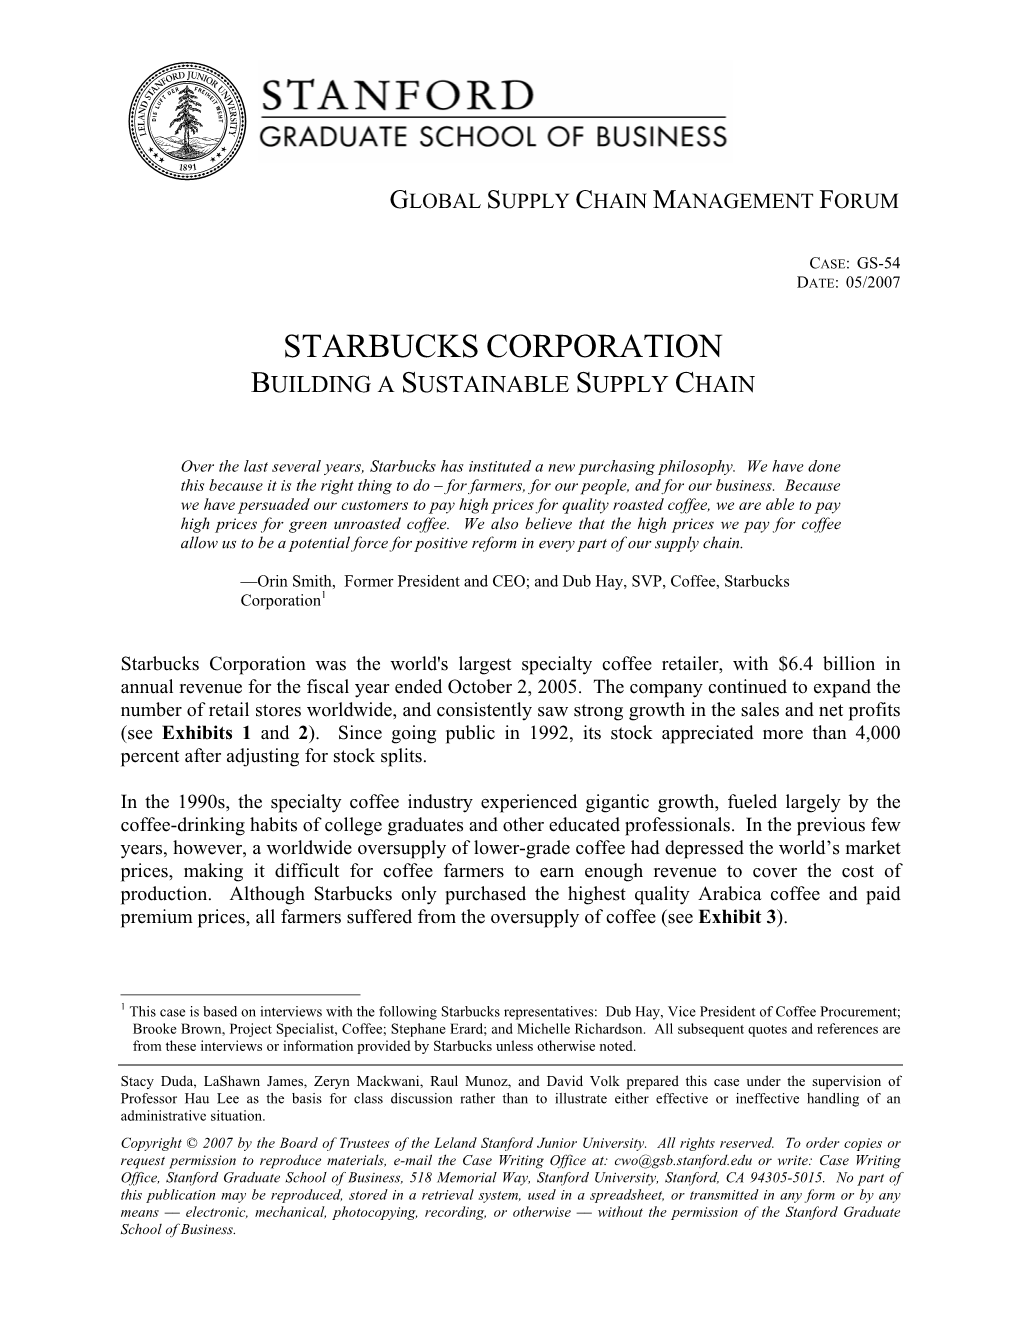 Starbucks Corporation: Building a Sustainable Supply Chain GS-54 P